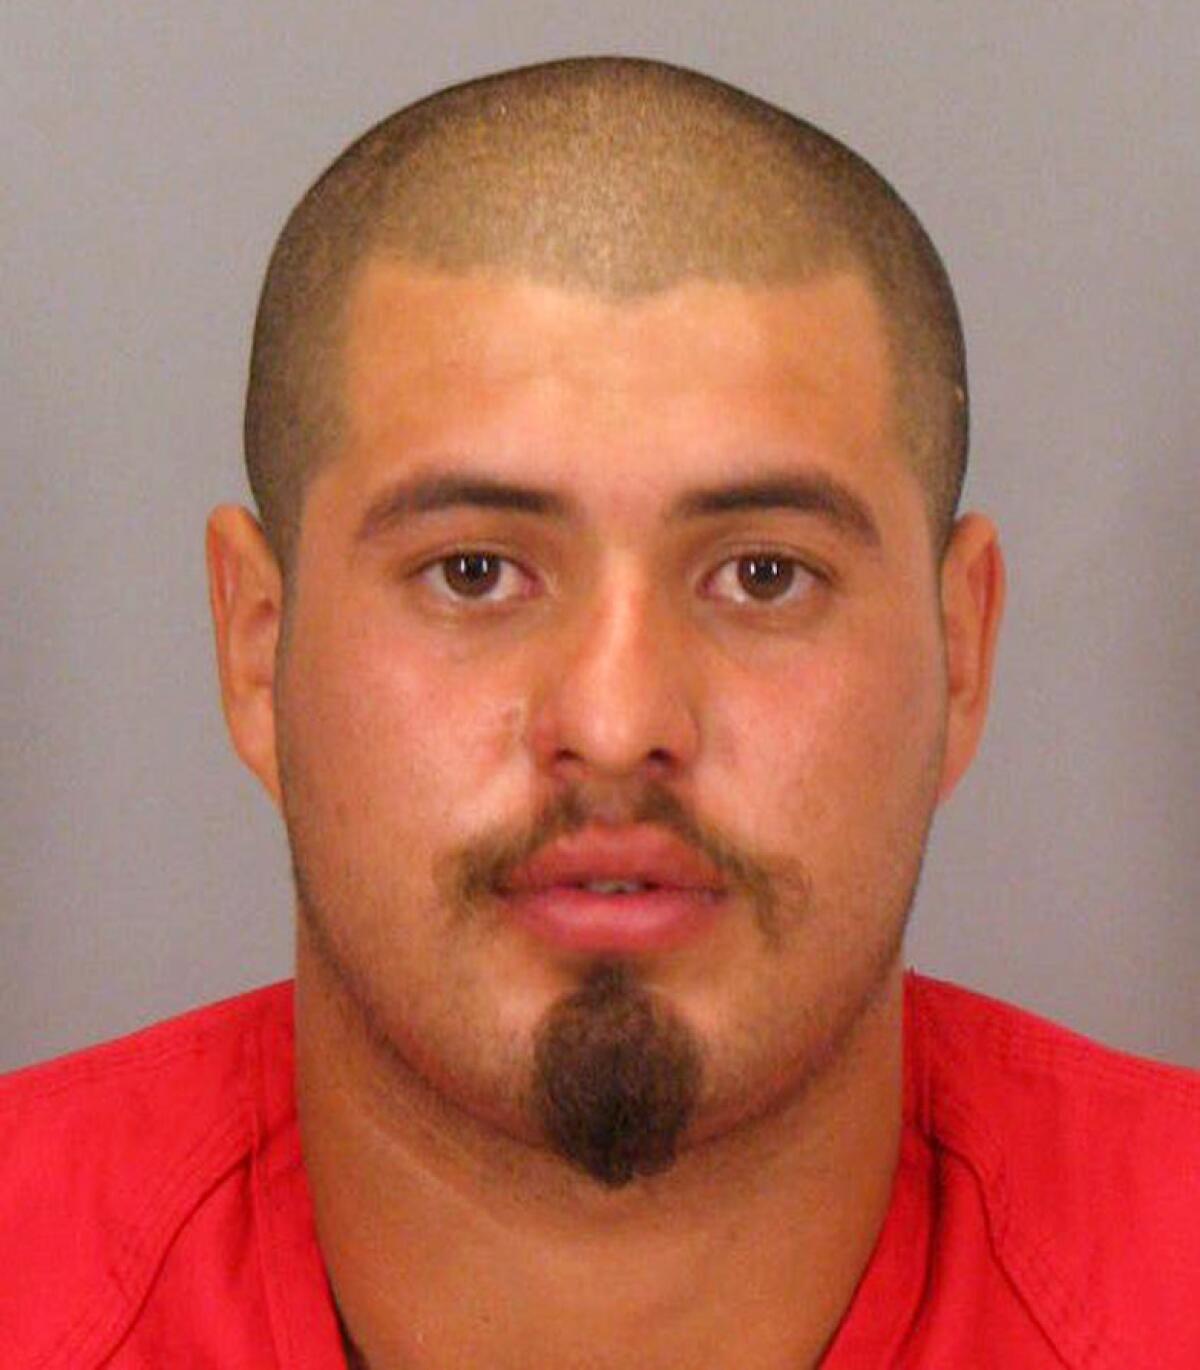 Antolin Garcia-Torres, seen in an undated photo provided by the Santa Clara County Sheriff's Office, has been charged with the murder of Sierra LaMar, a 15-year-old high school student from Morgan Hill who was abducted in 2012.